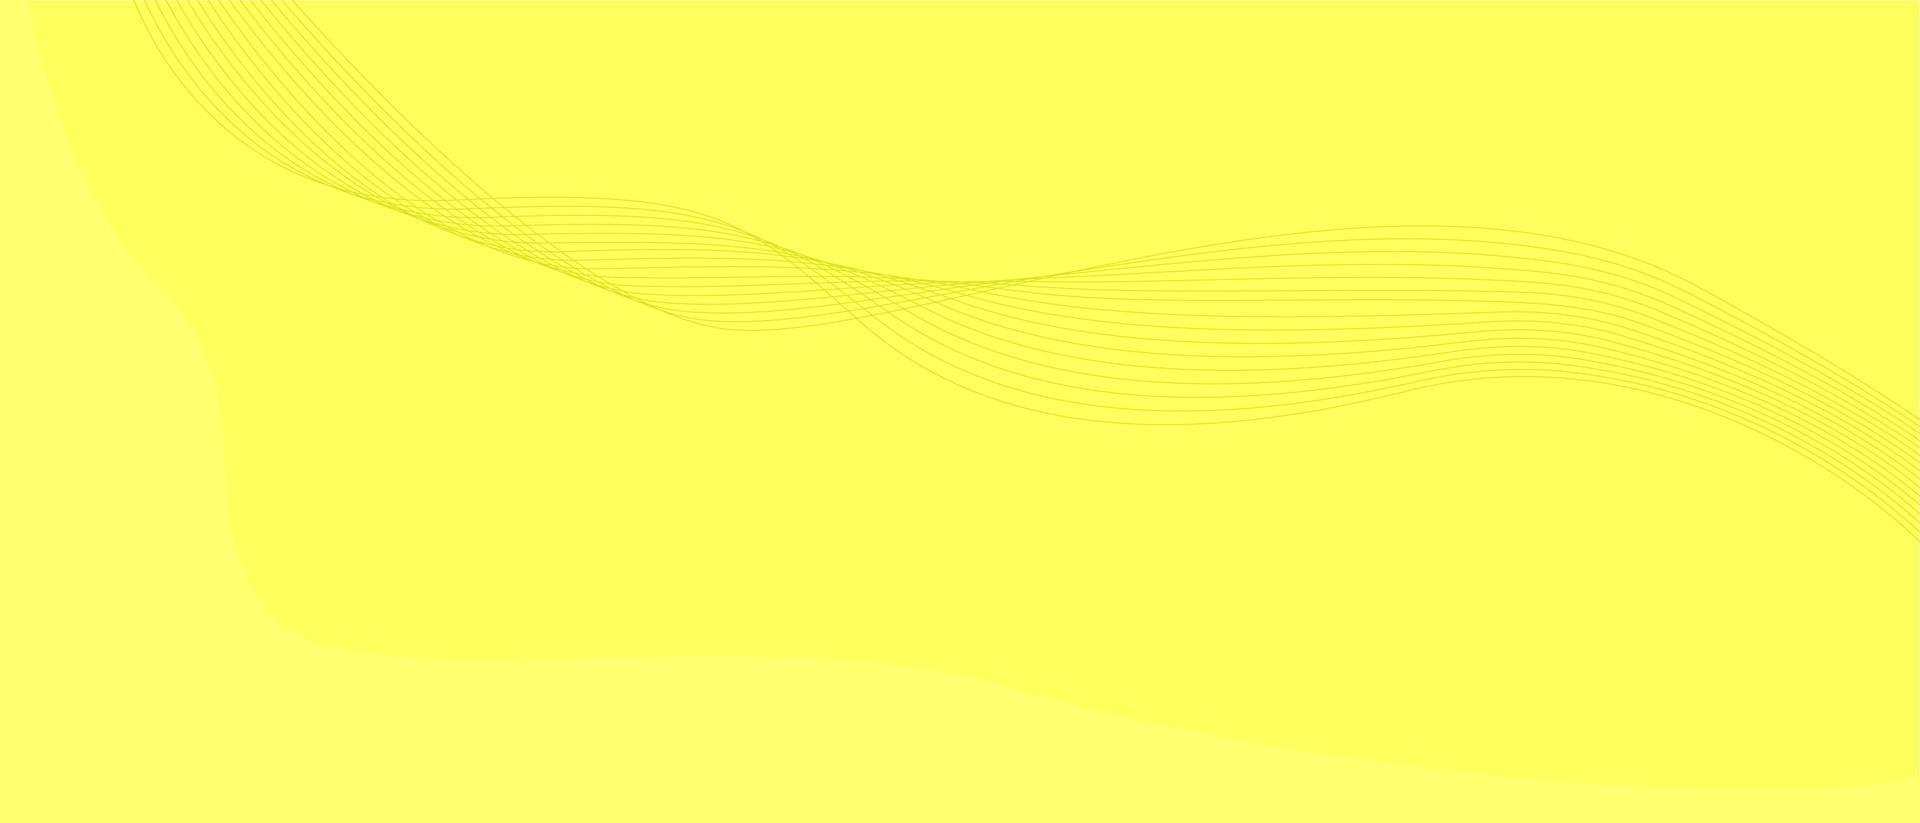 Yellow background with geometric wavy line vector